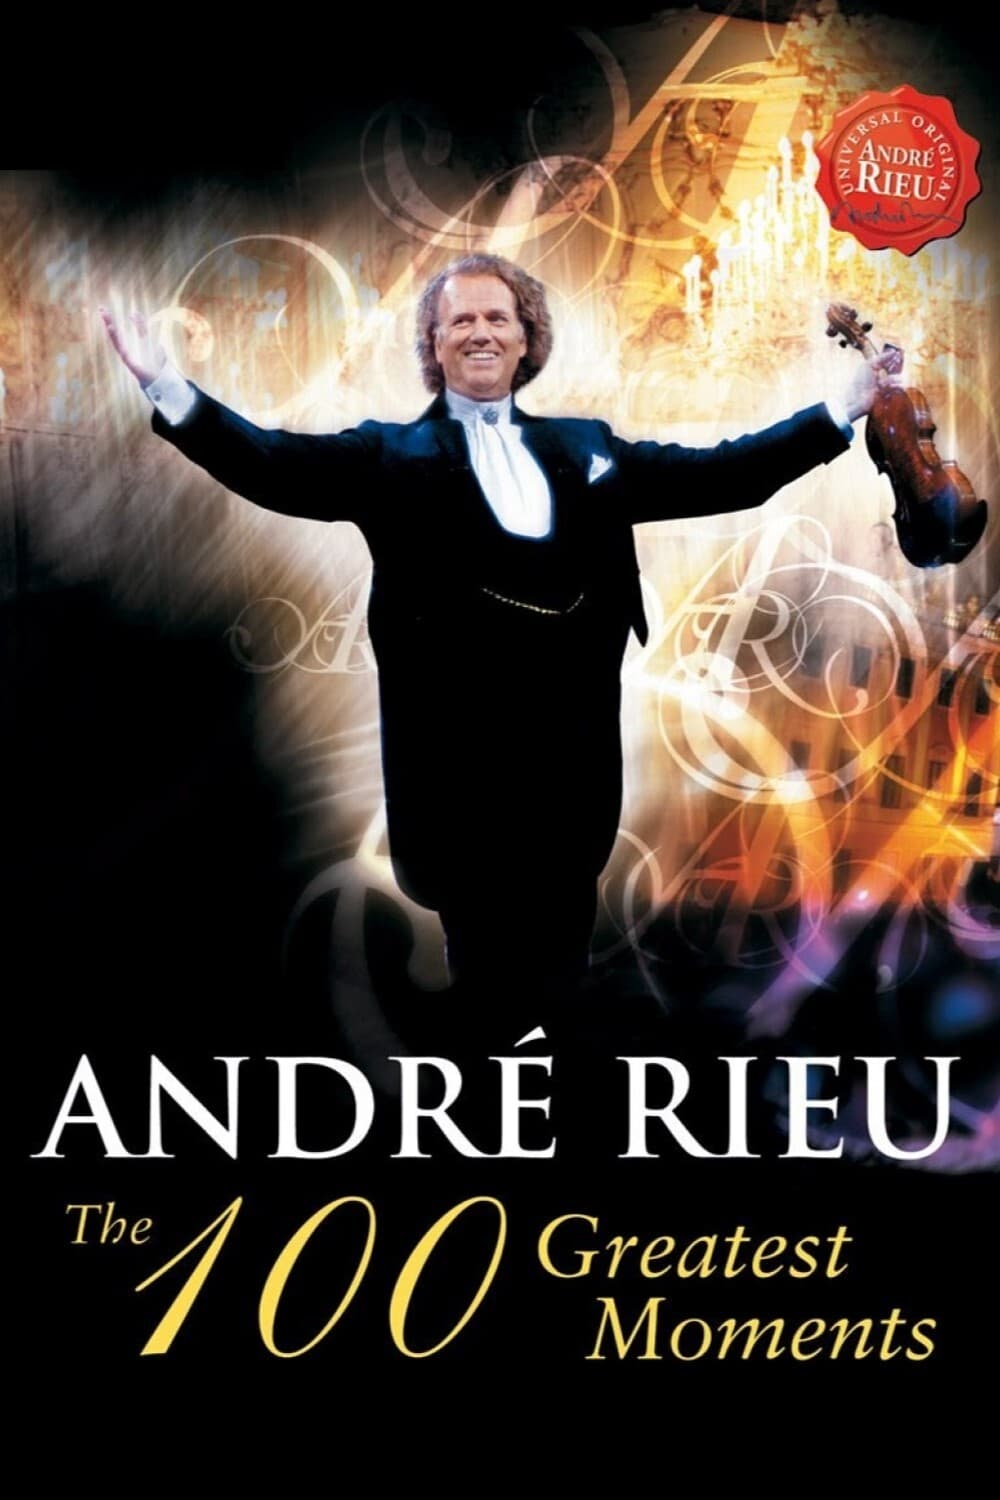 André Rieu - The 100 Greatest Moments